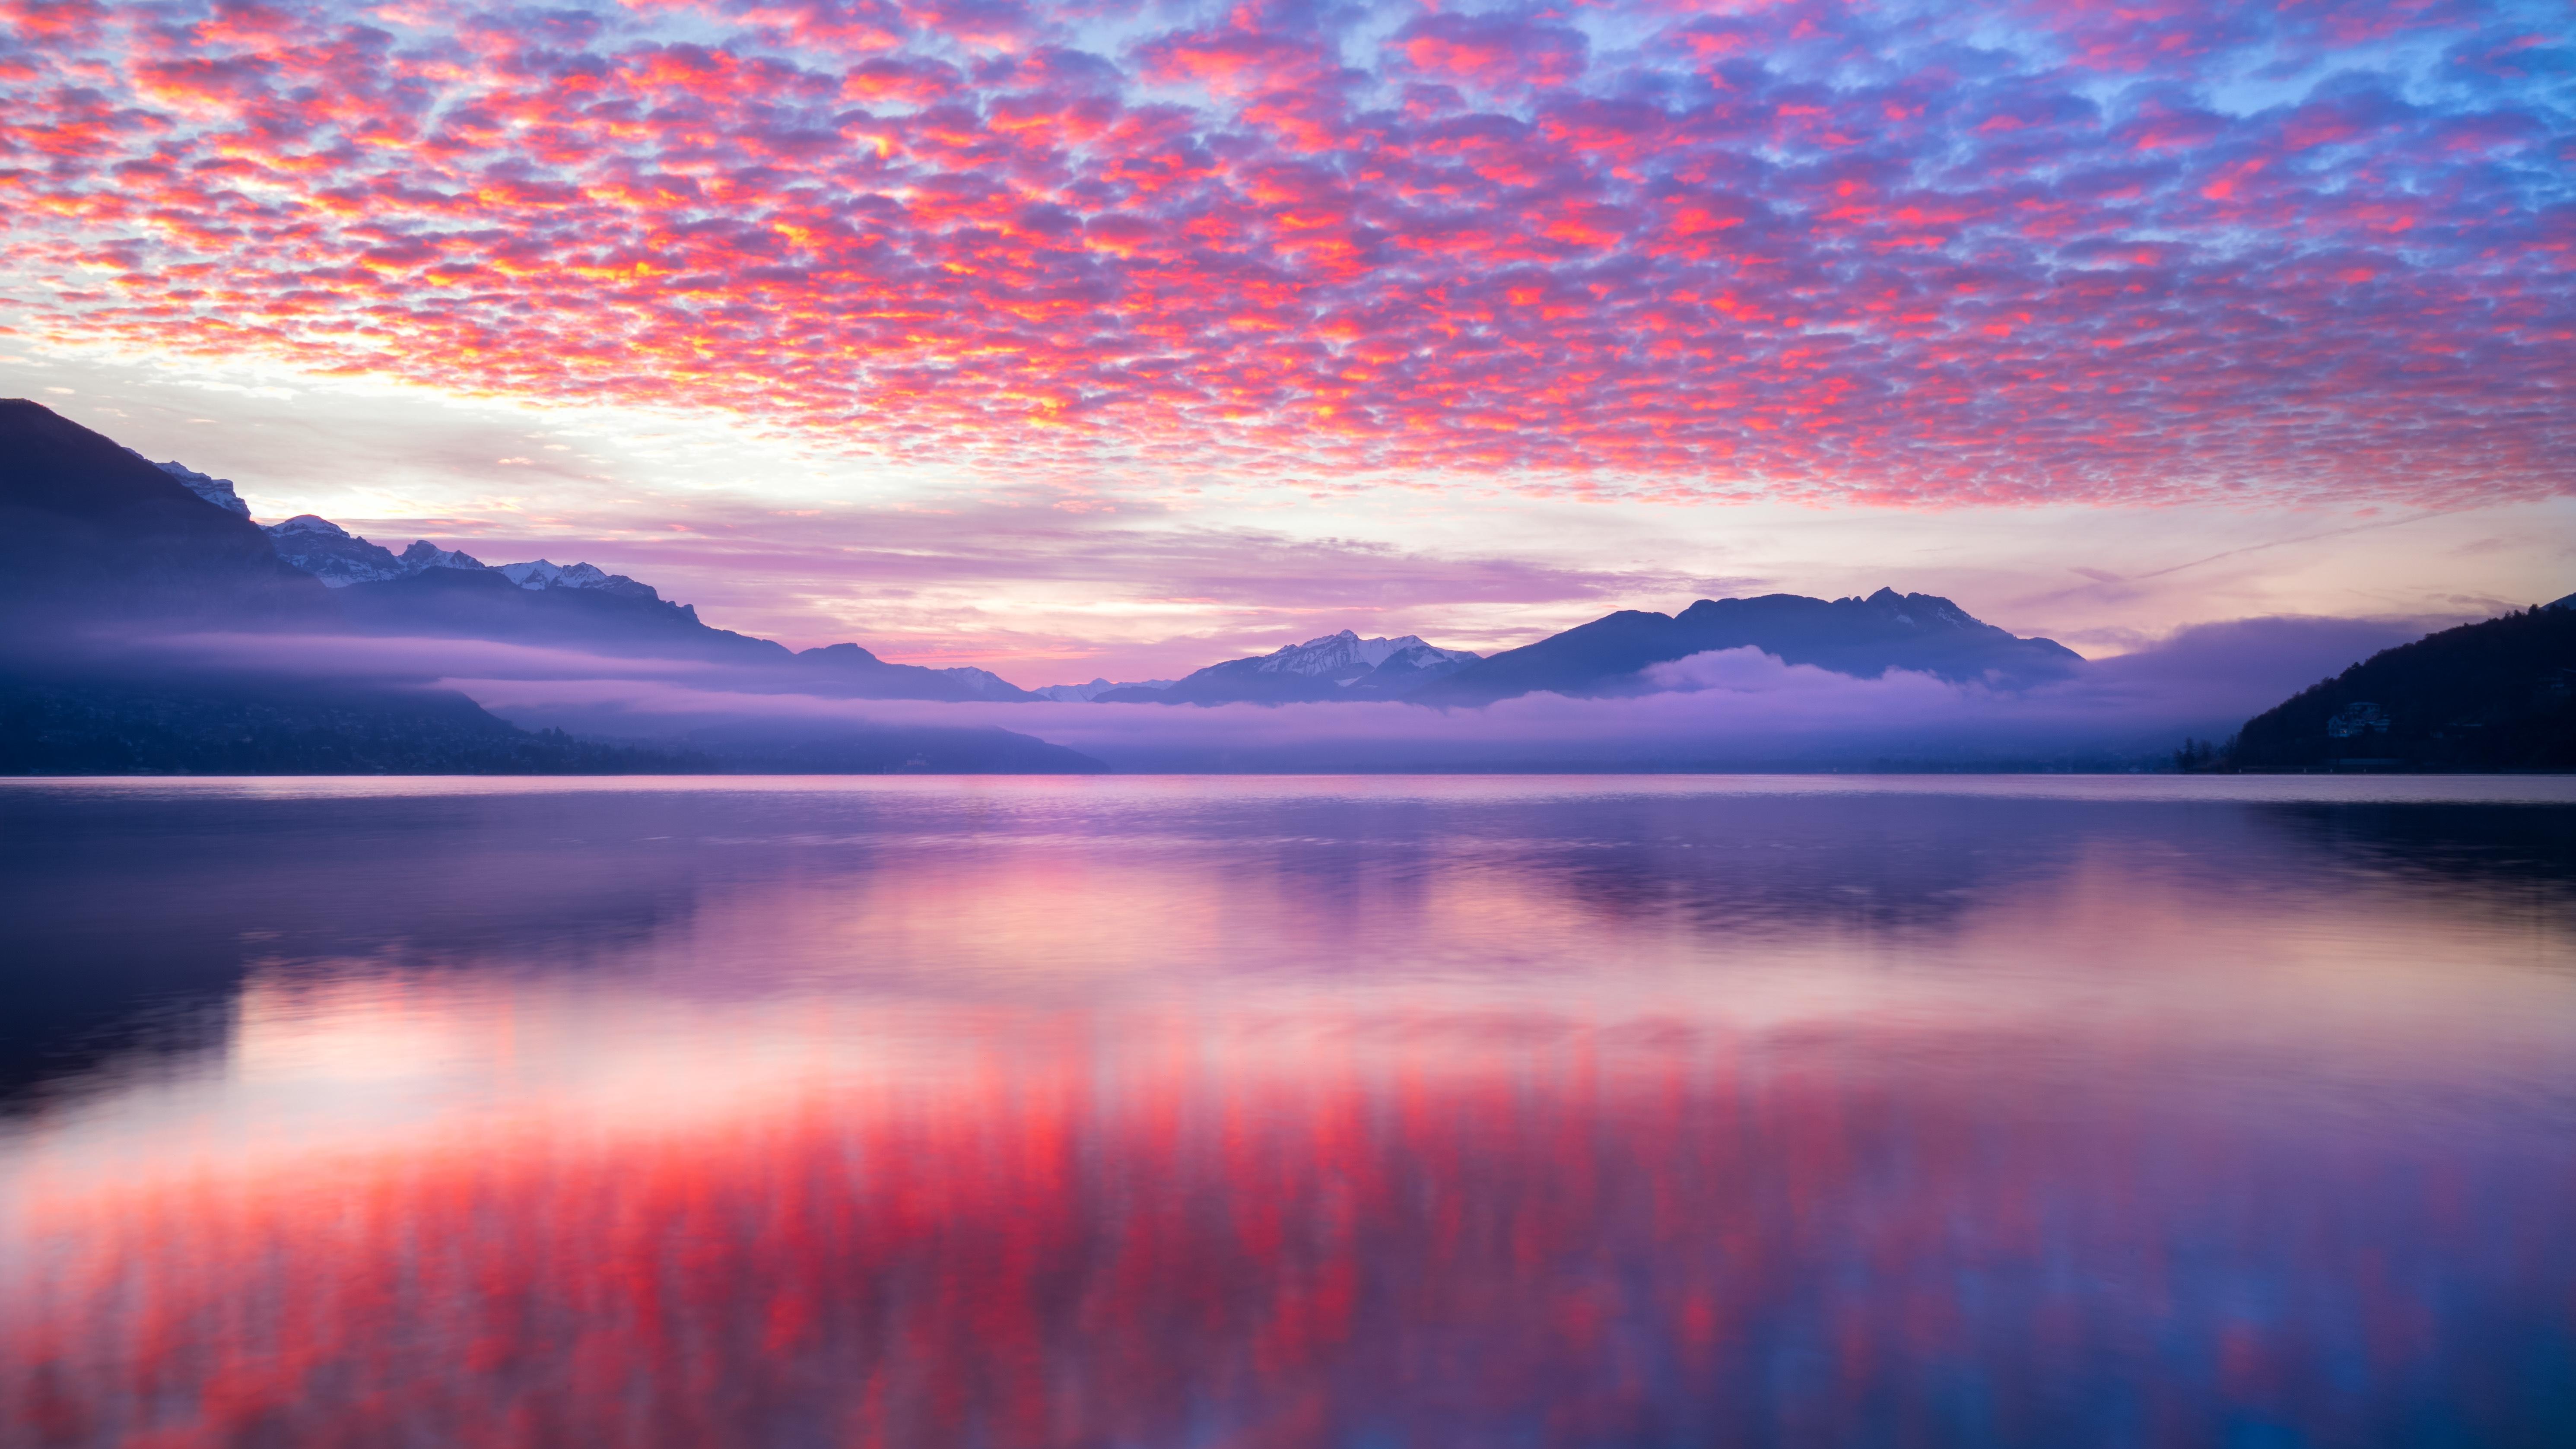 Download 5963x3354 Lake, Sunset, Pretty Sky, Scenic, Mountains